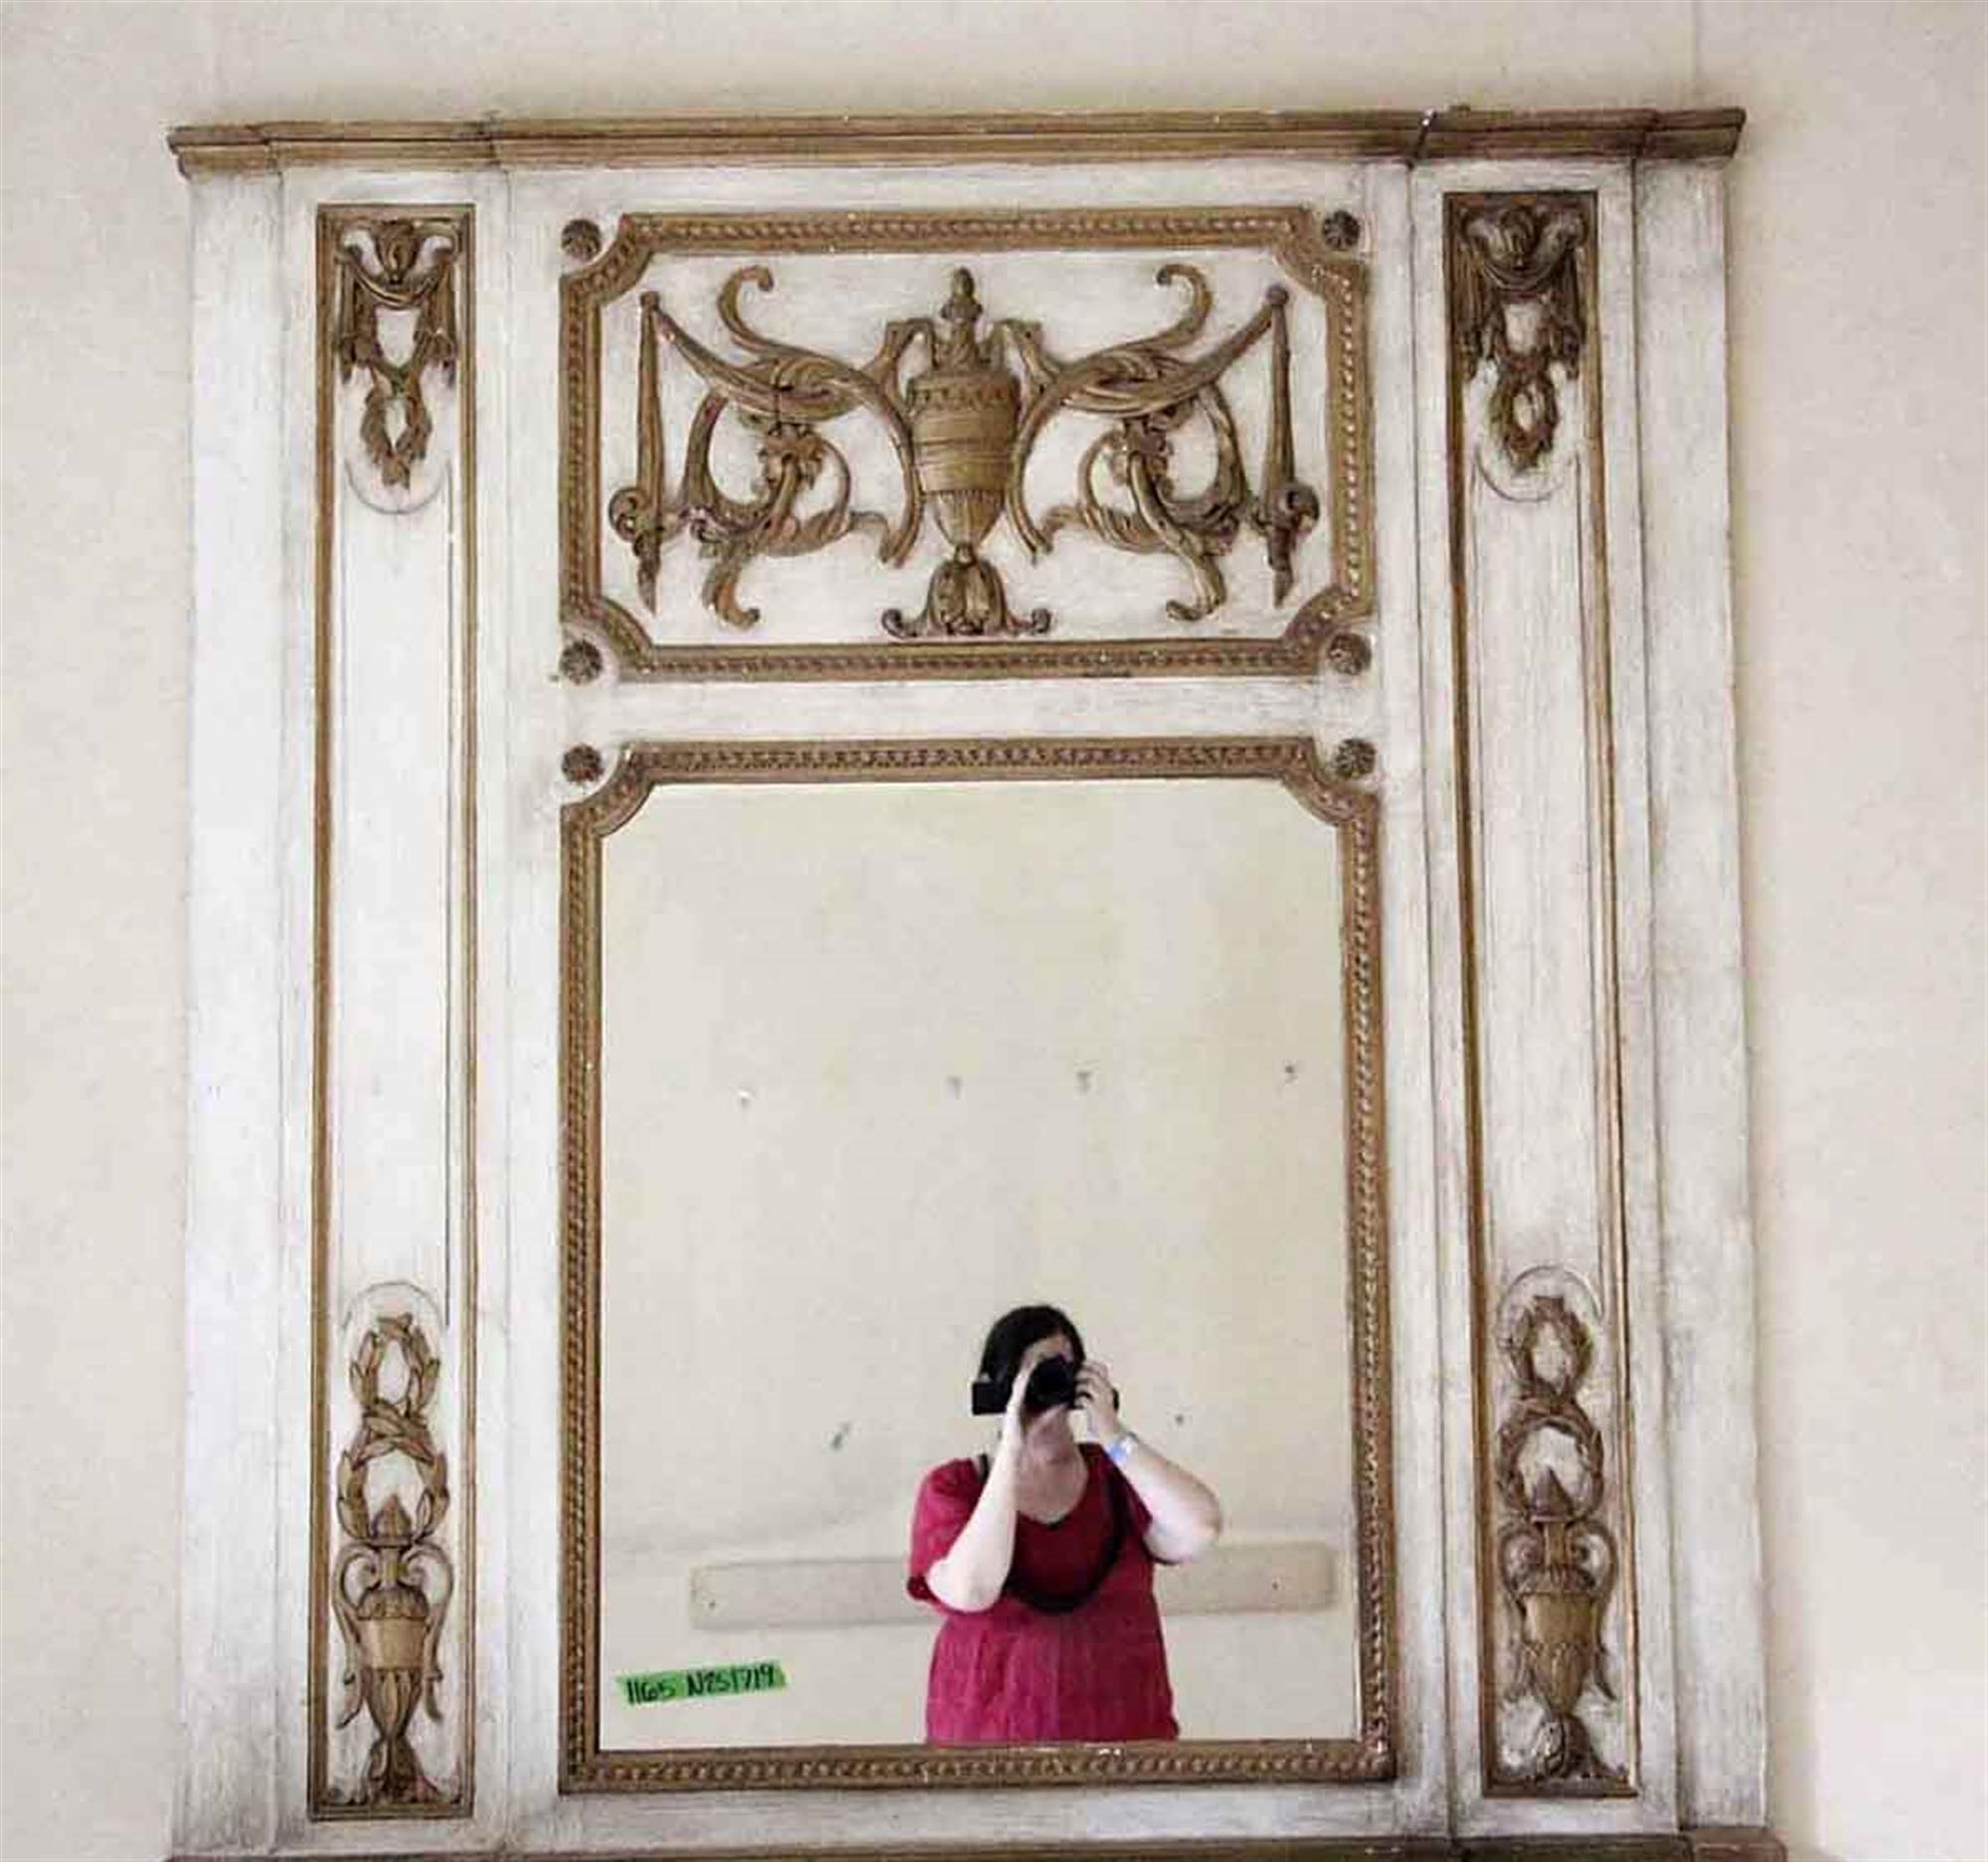 Decorative white wooden over mantel mirror with carved details and an urn in the top center from the 1931 NYC Waldorf Astoria Hotel. Originally from France and installed in room 1165. A Waldorf Astoria authenticity card included with your purchase.